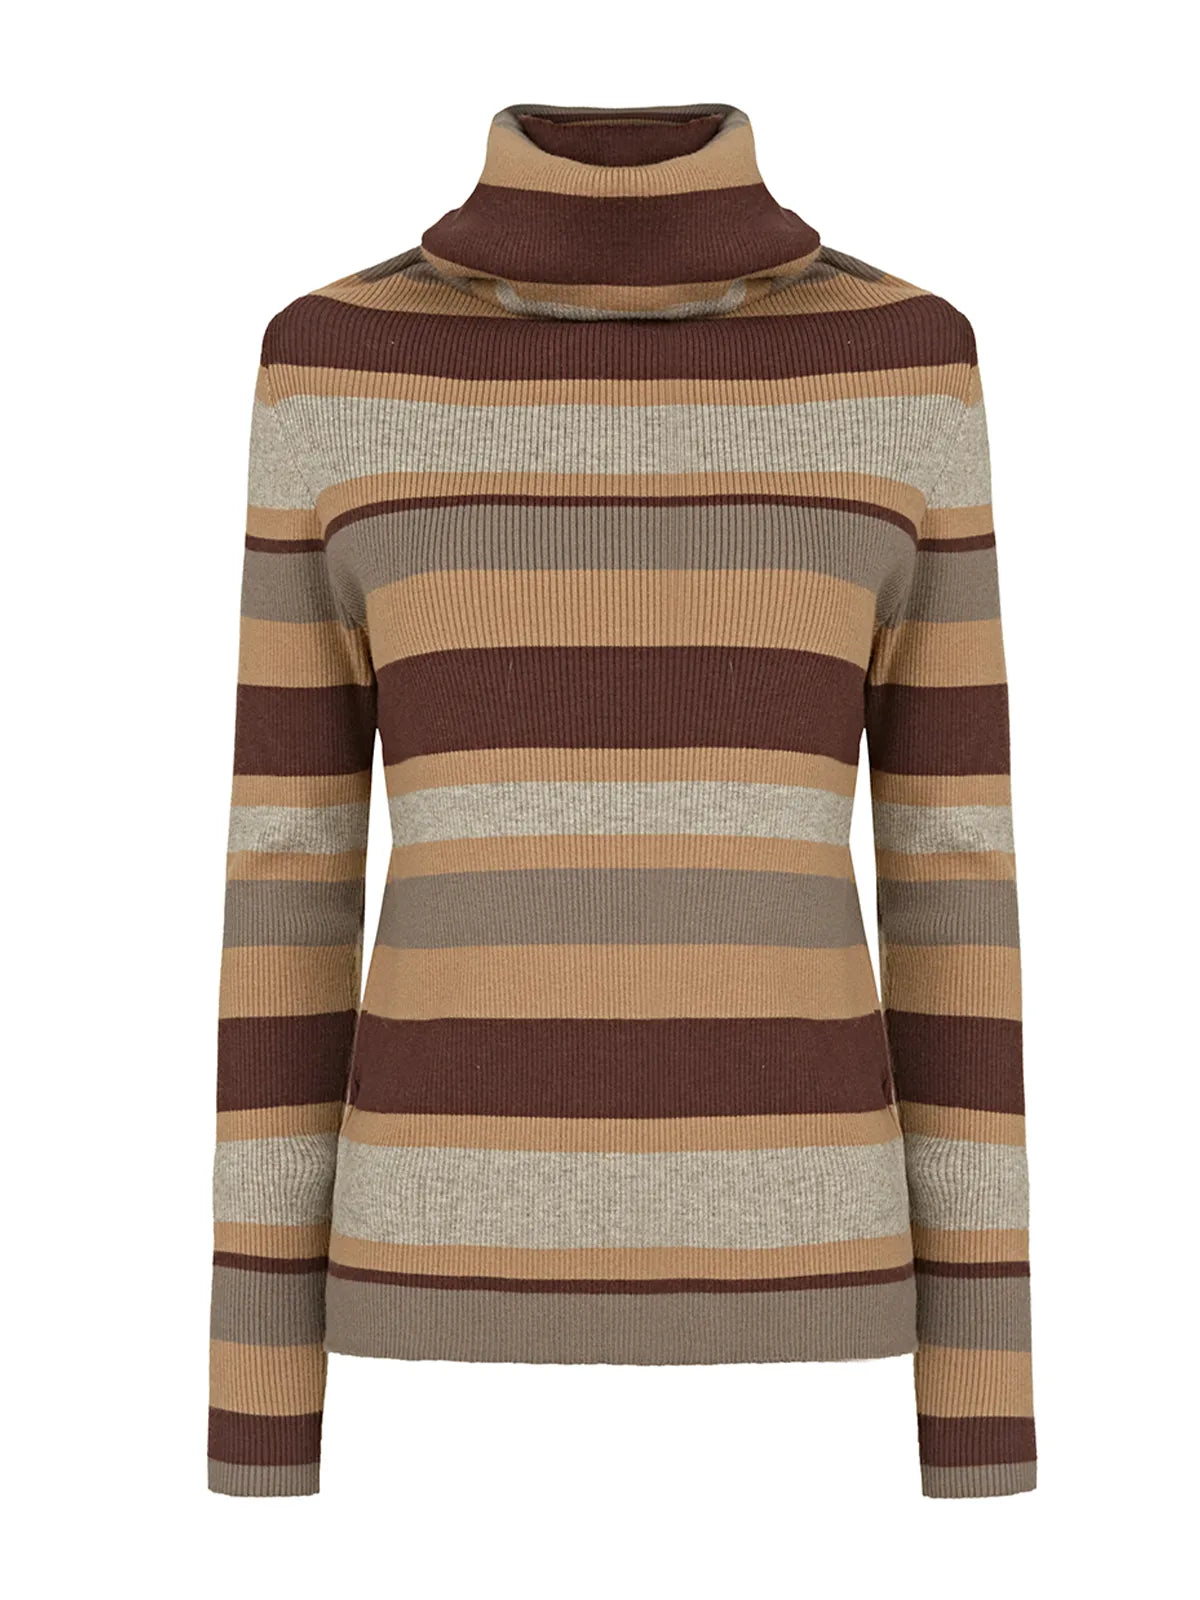 Transition seamlessly from casual to formal occasions with this versatile color-blocked sweater, offering a tailored fit that enhances your silhouette.